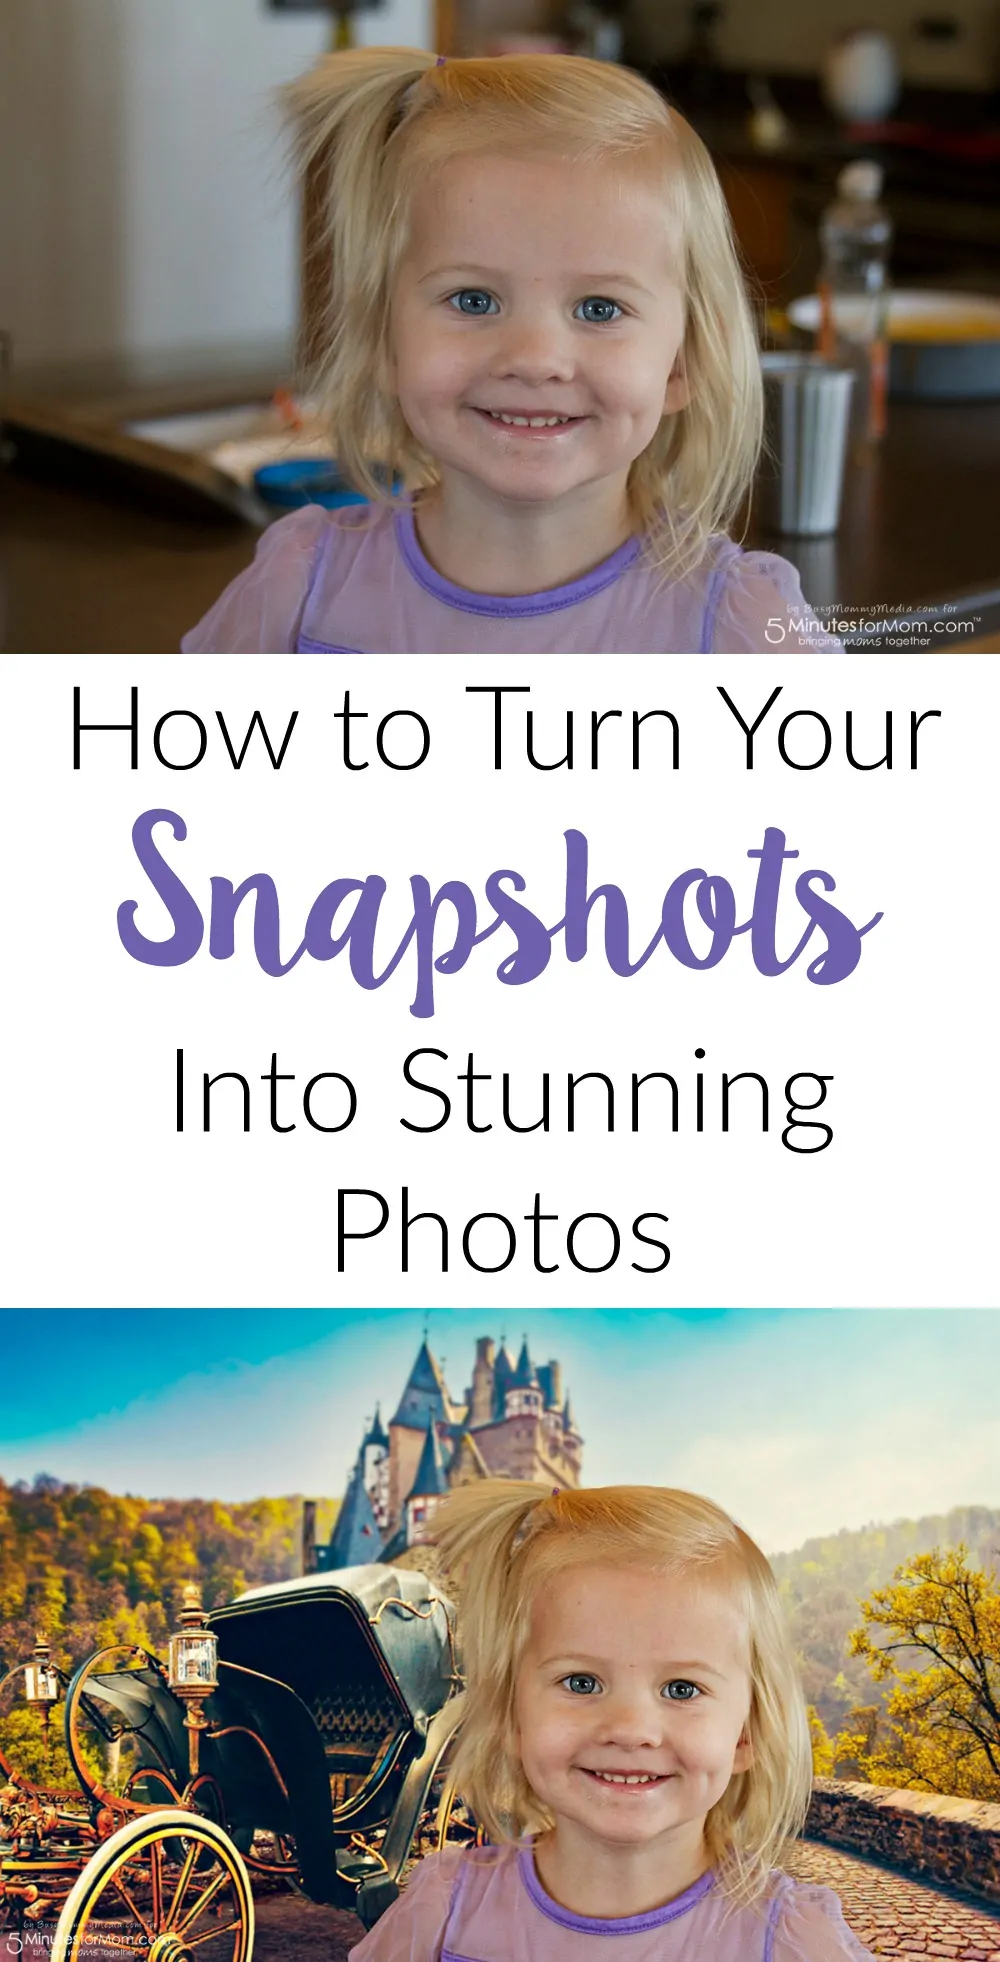 How to turn your snapshots into stunning photos